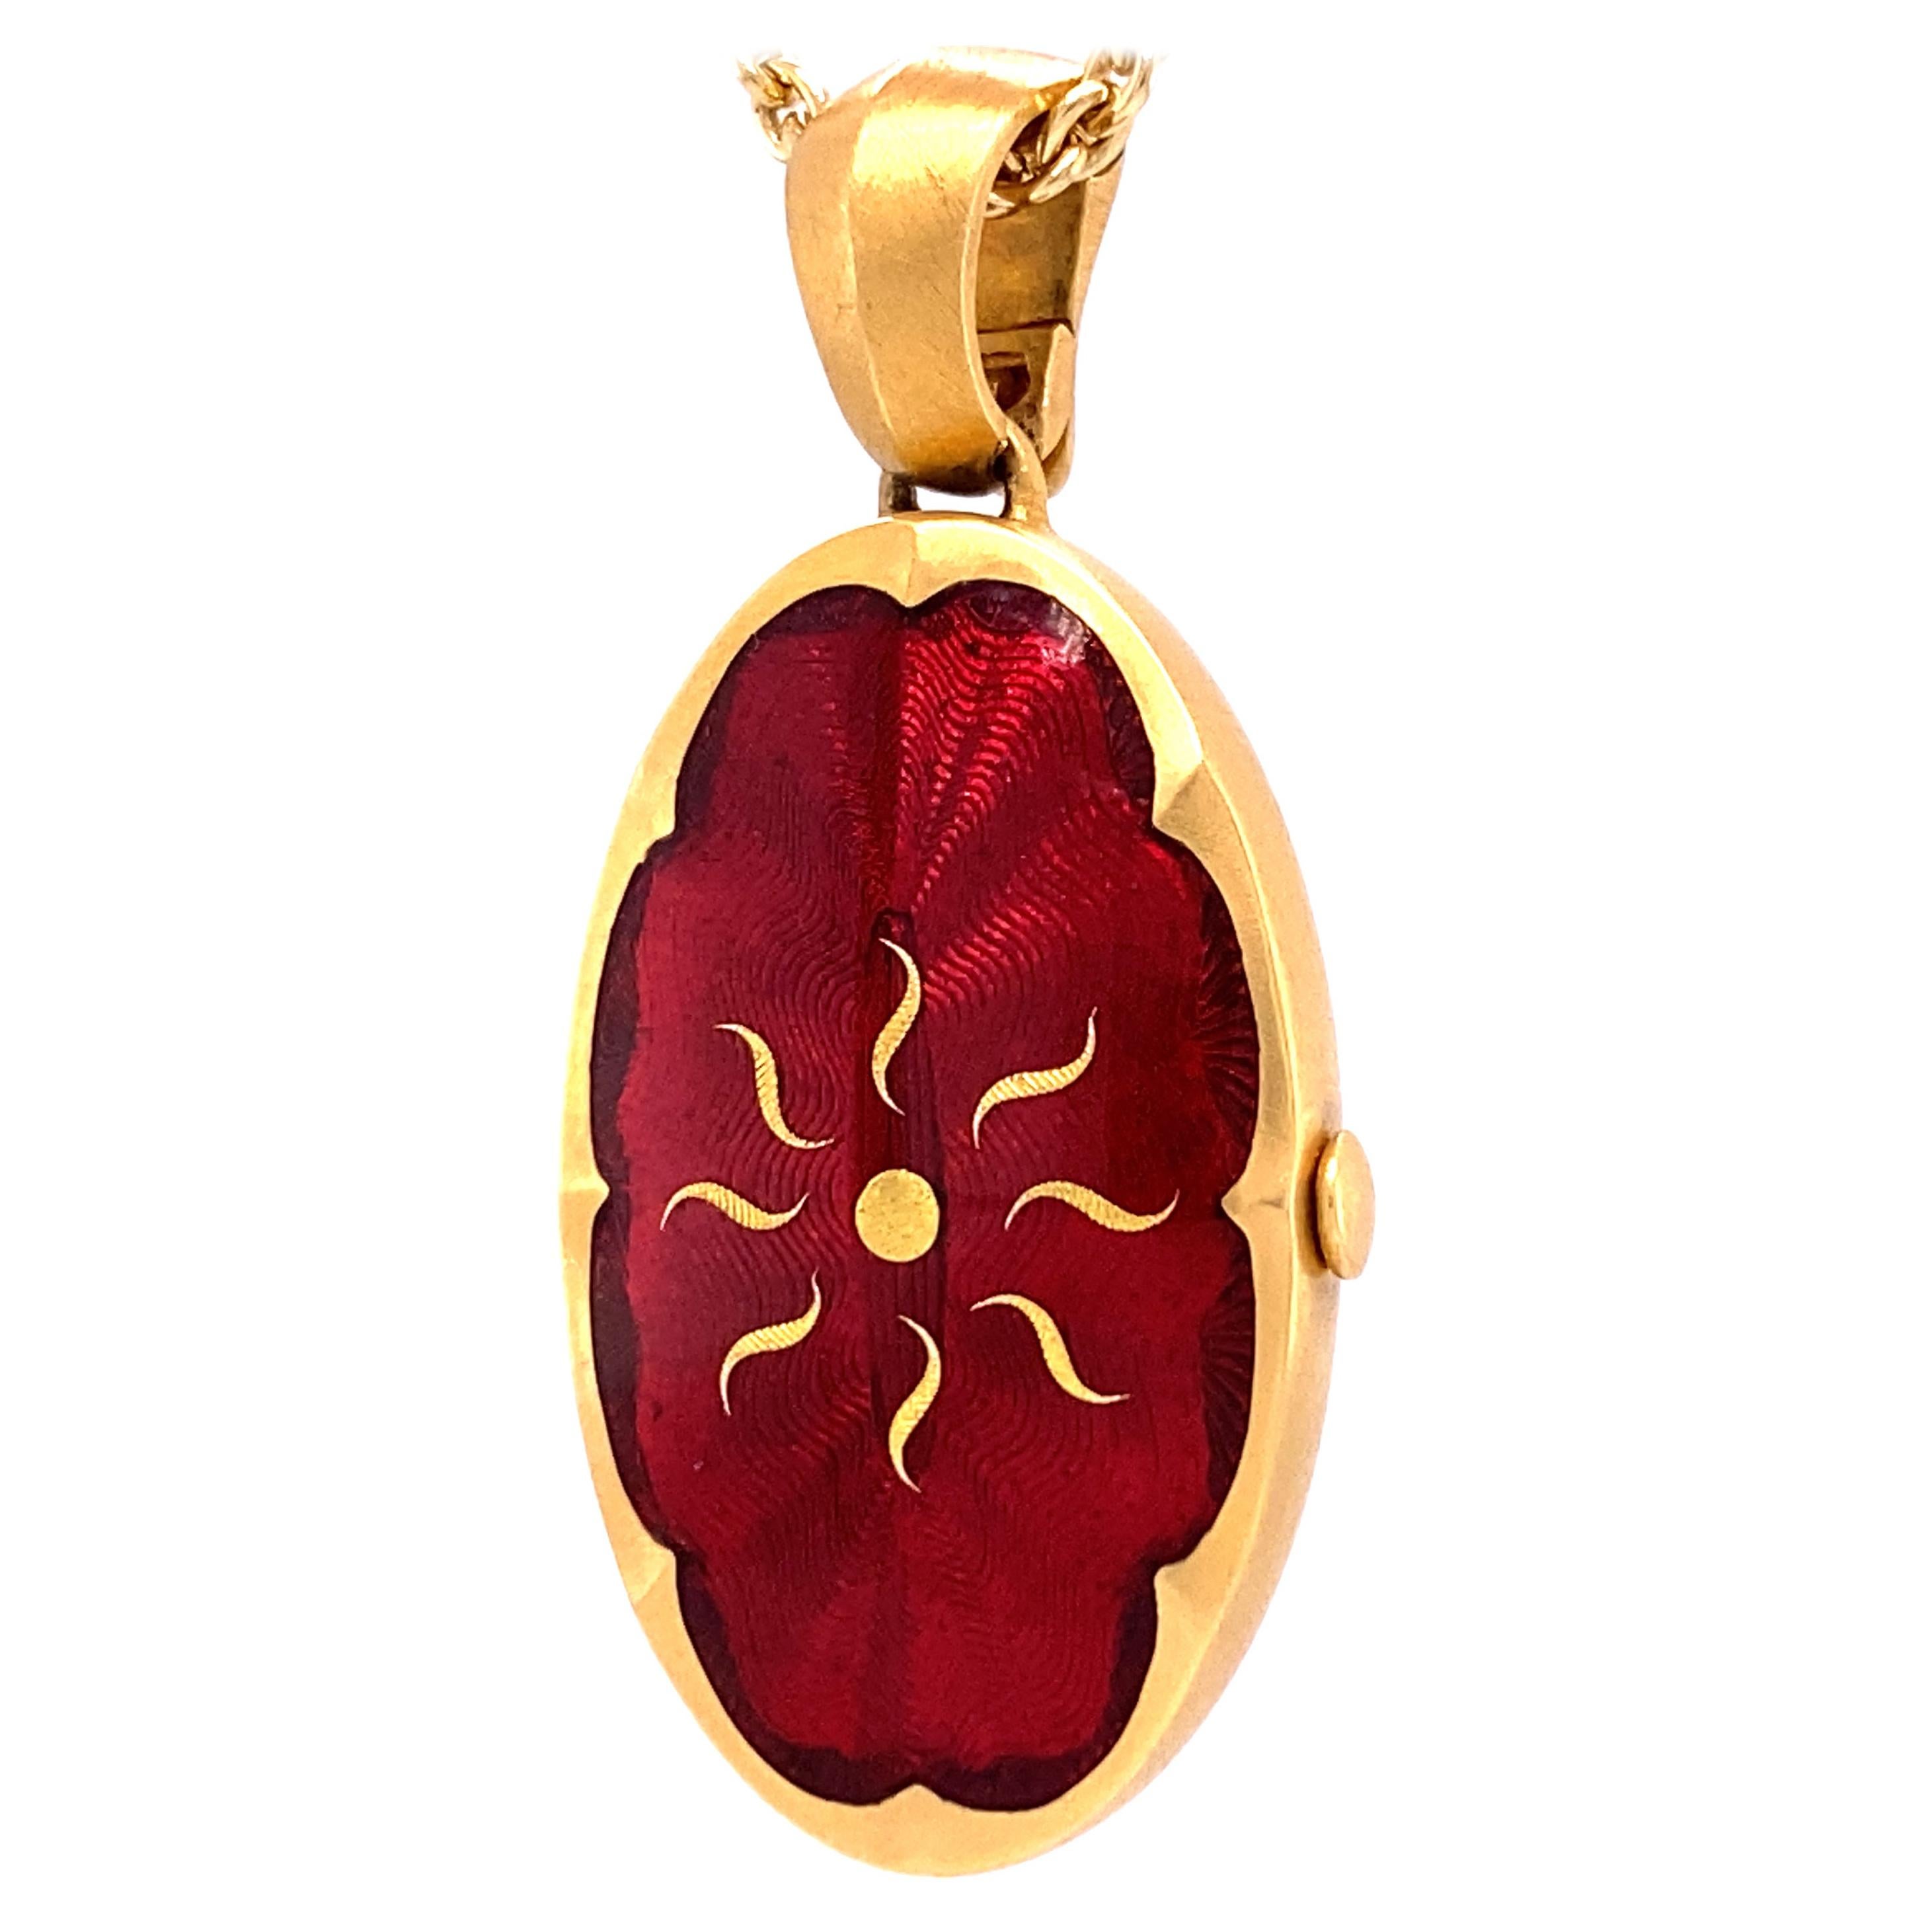 Oval Locket 18k Yellow Gold Red Guilloche Vitreous Enamel & 18k Gold Paillons 